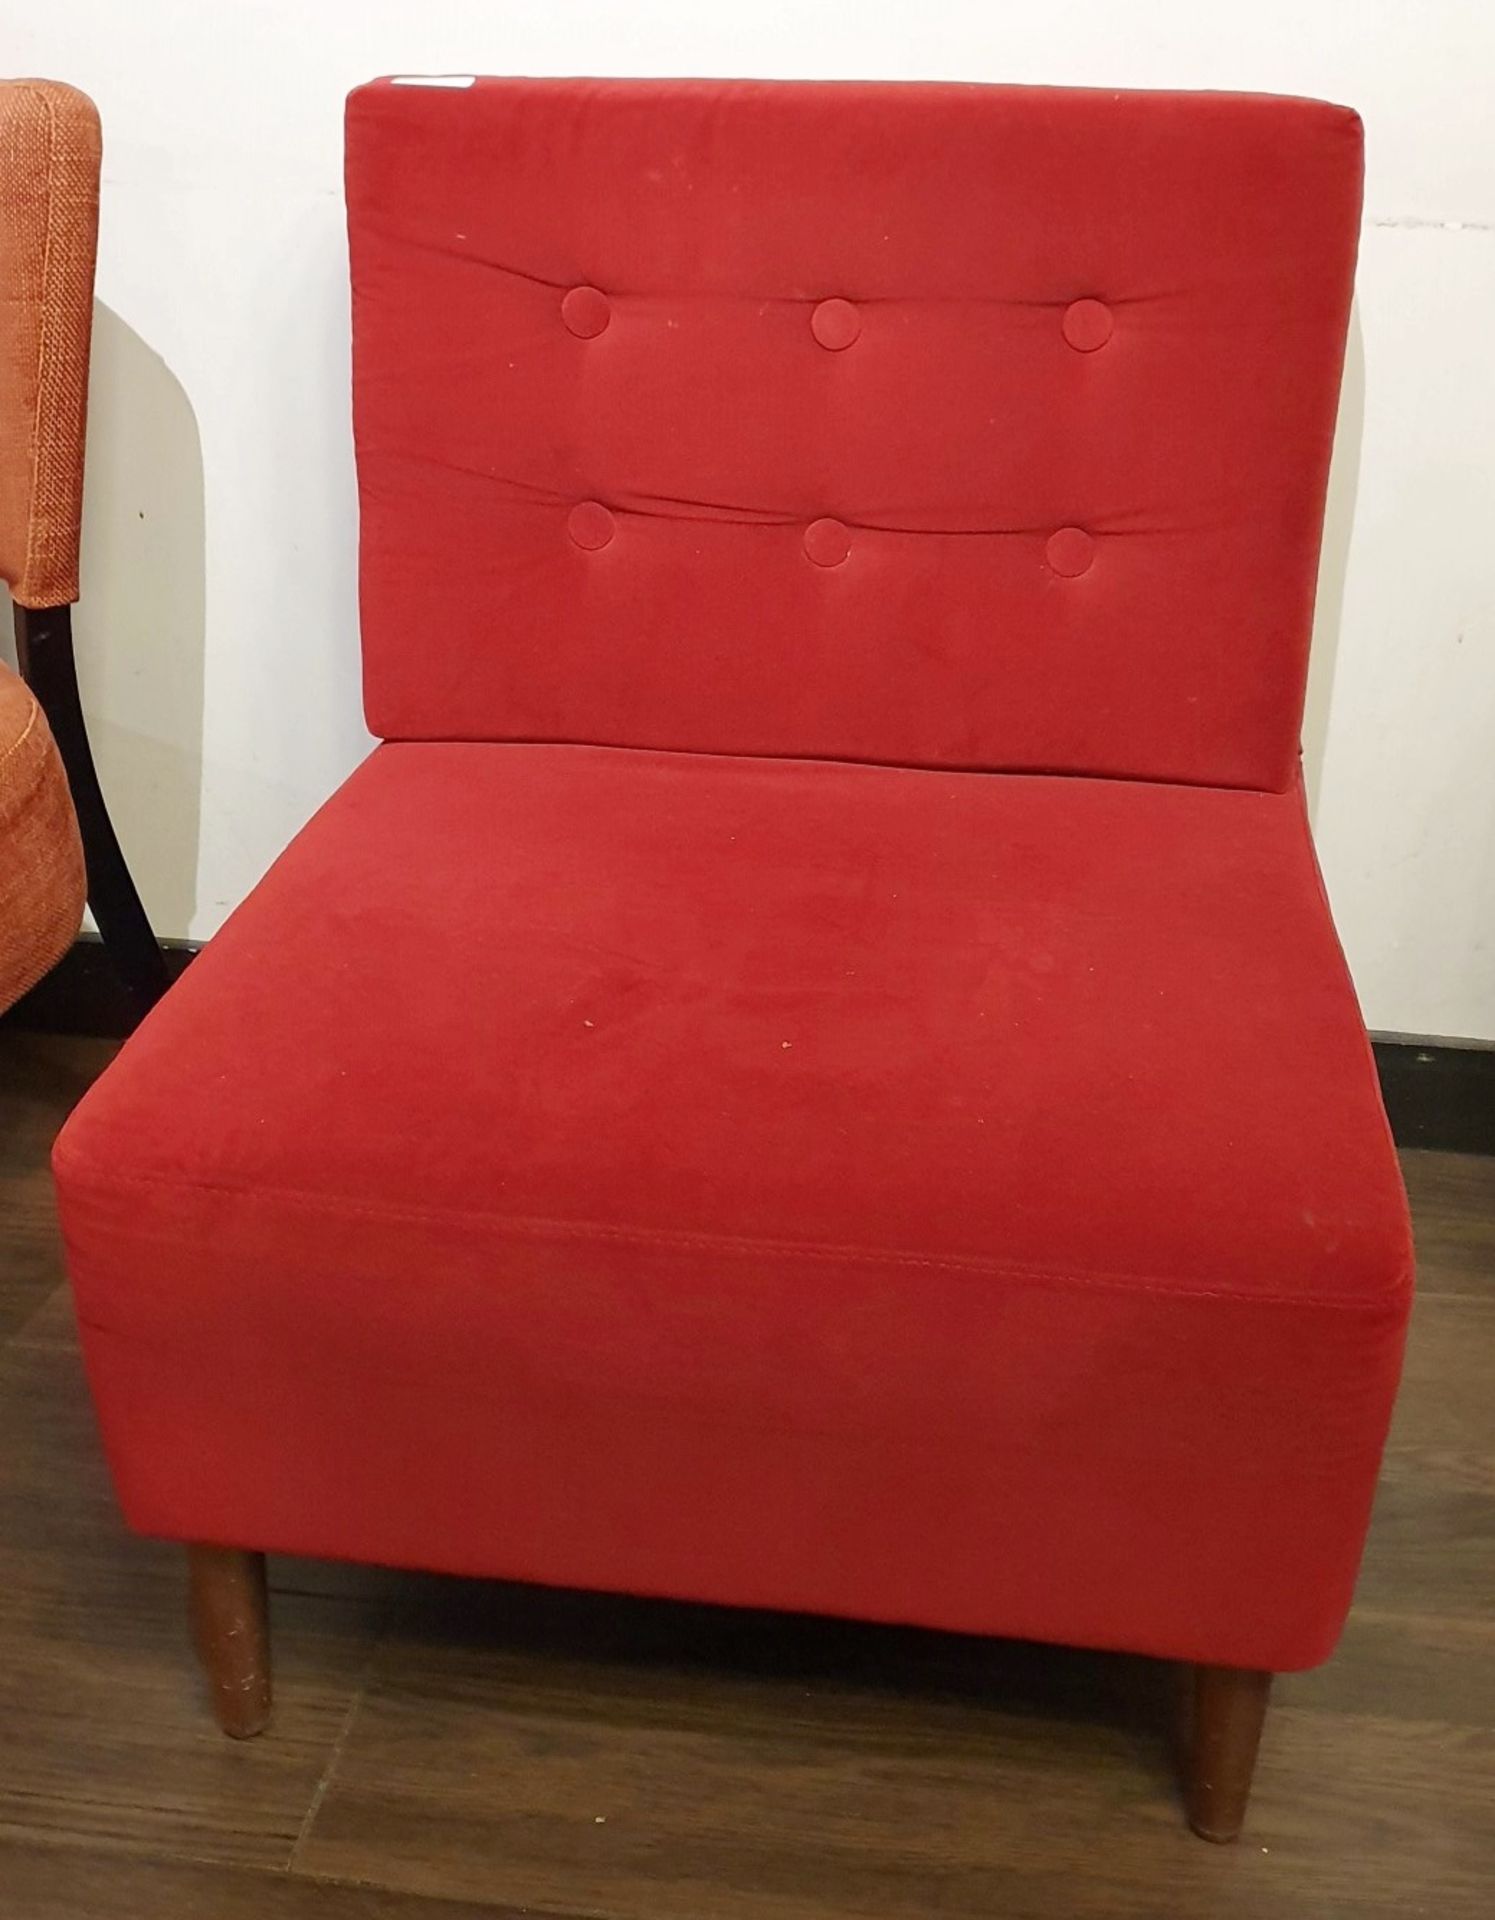 1 x Button Back Modular Chair in Red Fabric - H44/80 x W67 x D70 cms - Ref PA157 - CL463 - Location: - Image 2 of 2